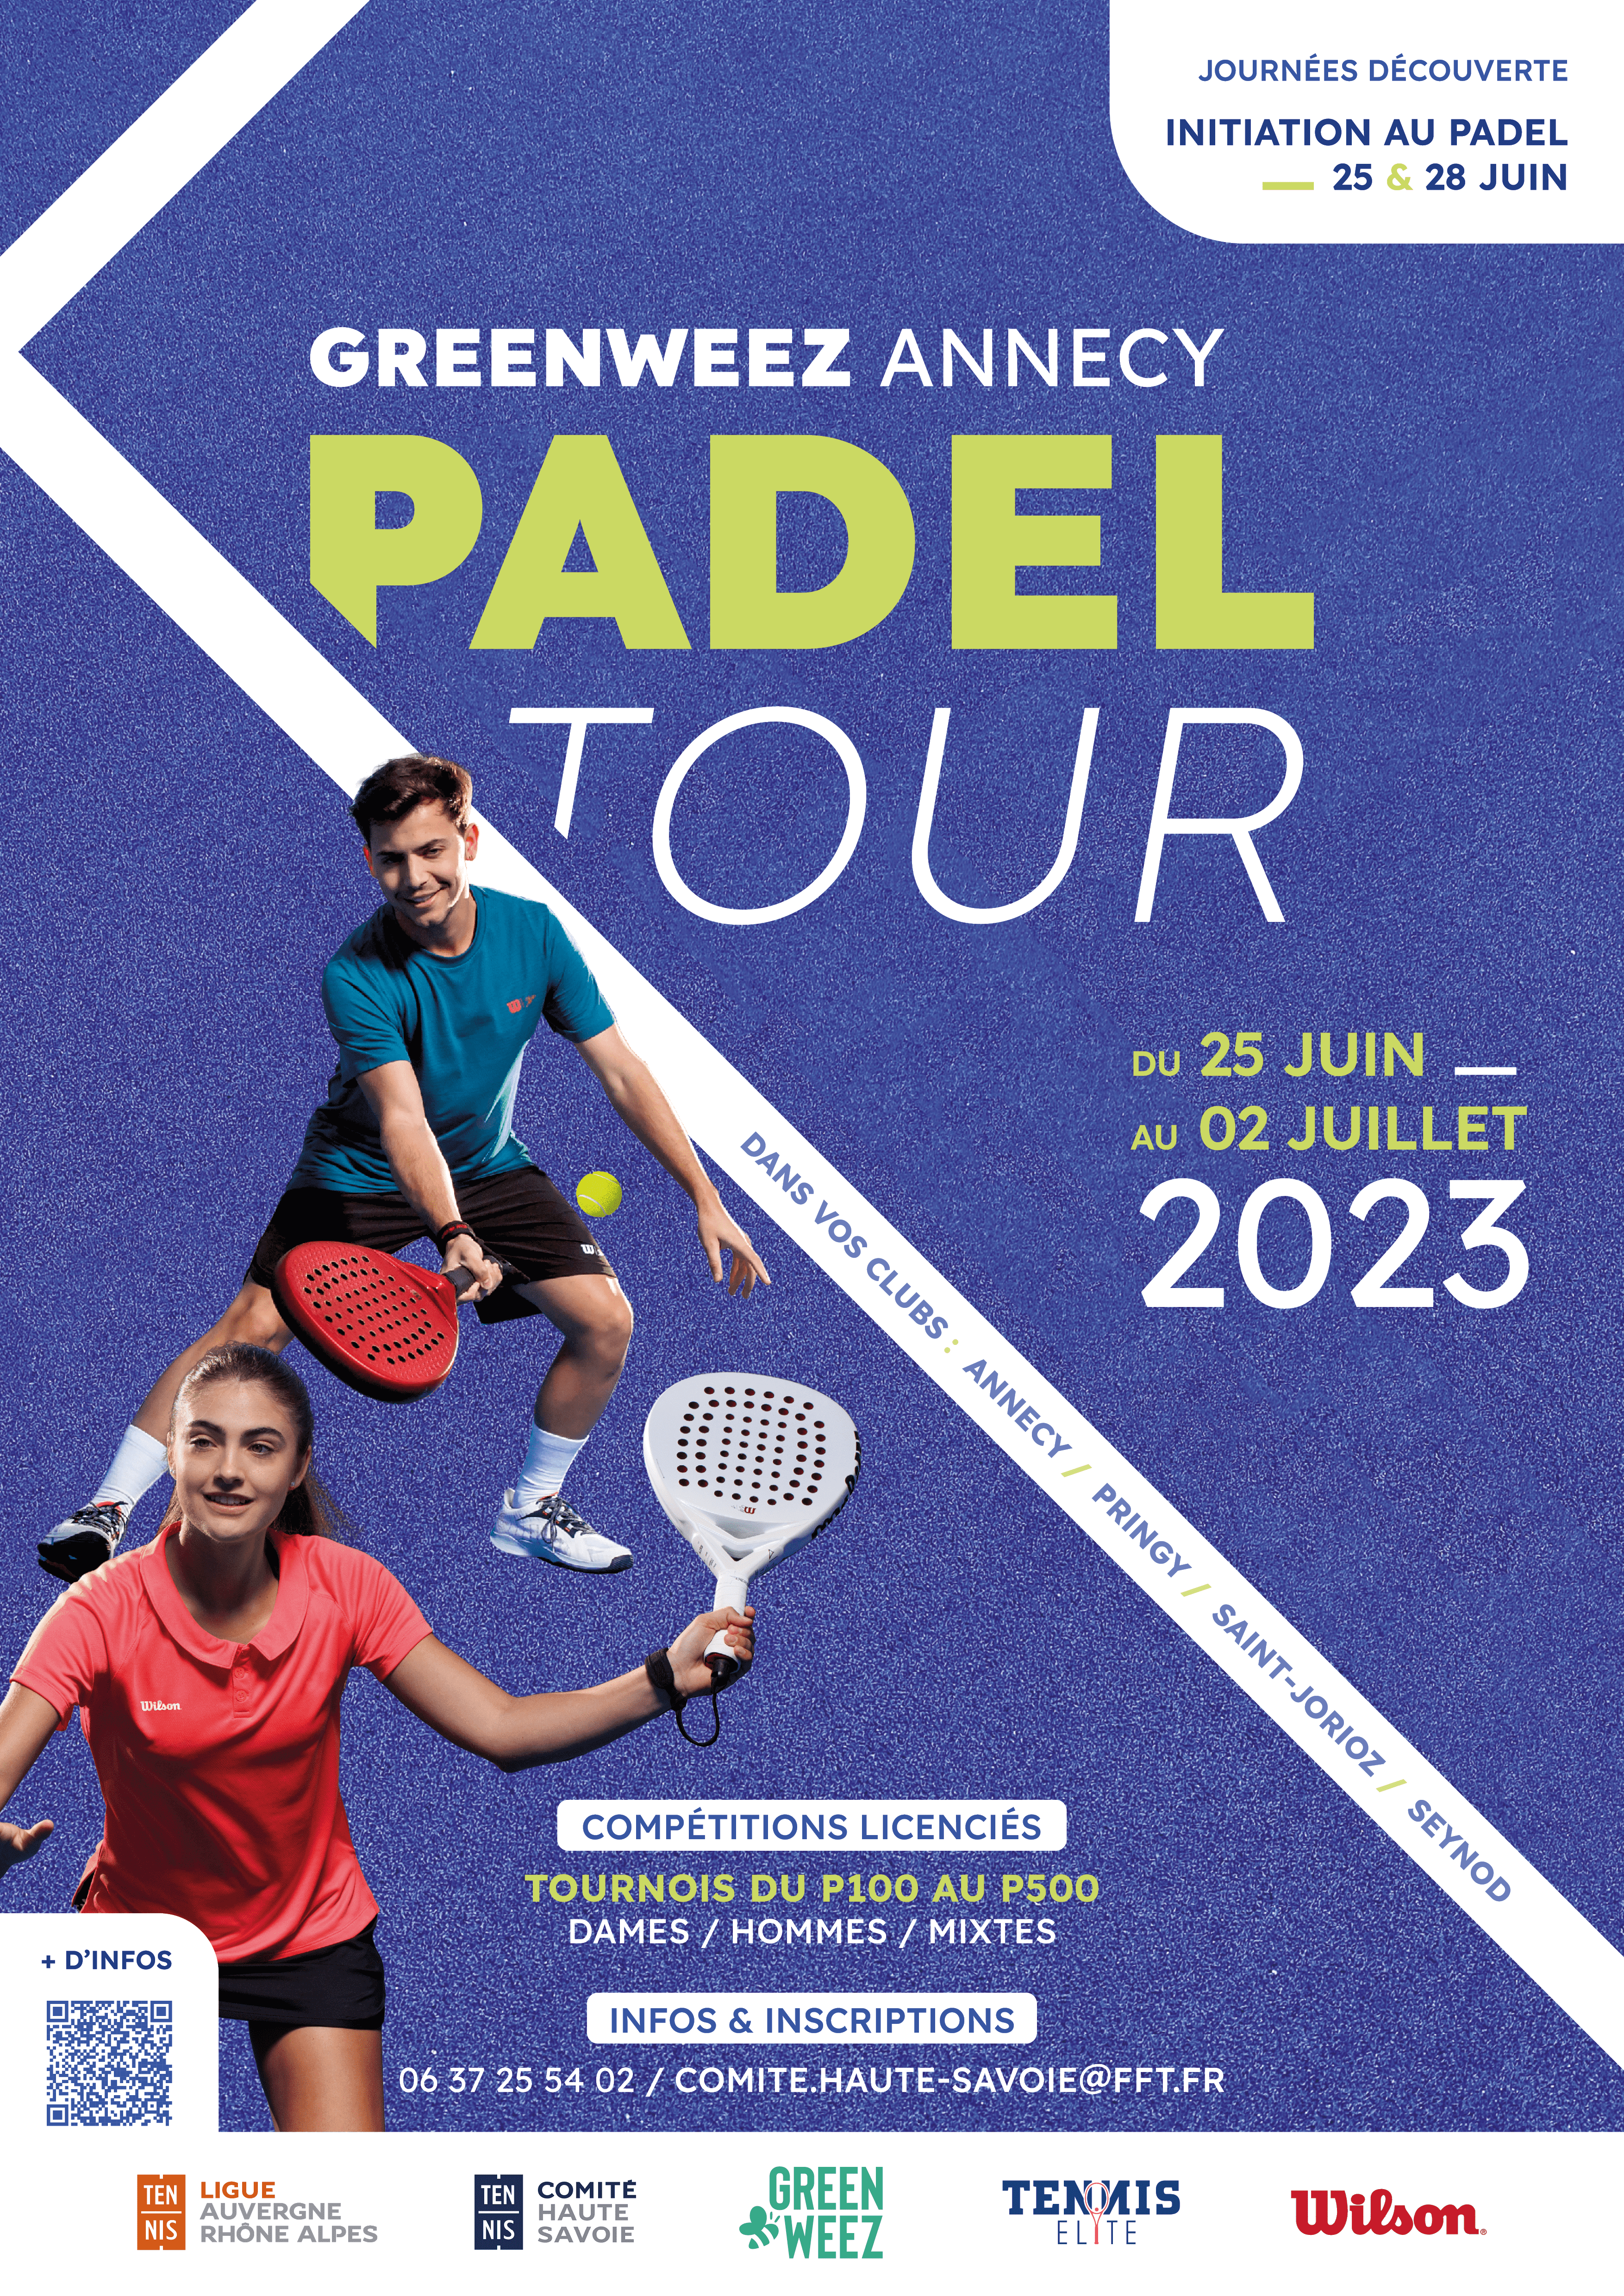 Greenweez Annecy Padel Tour-2023